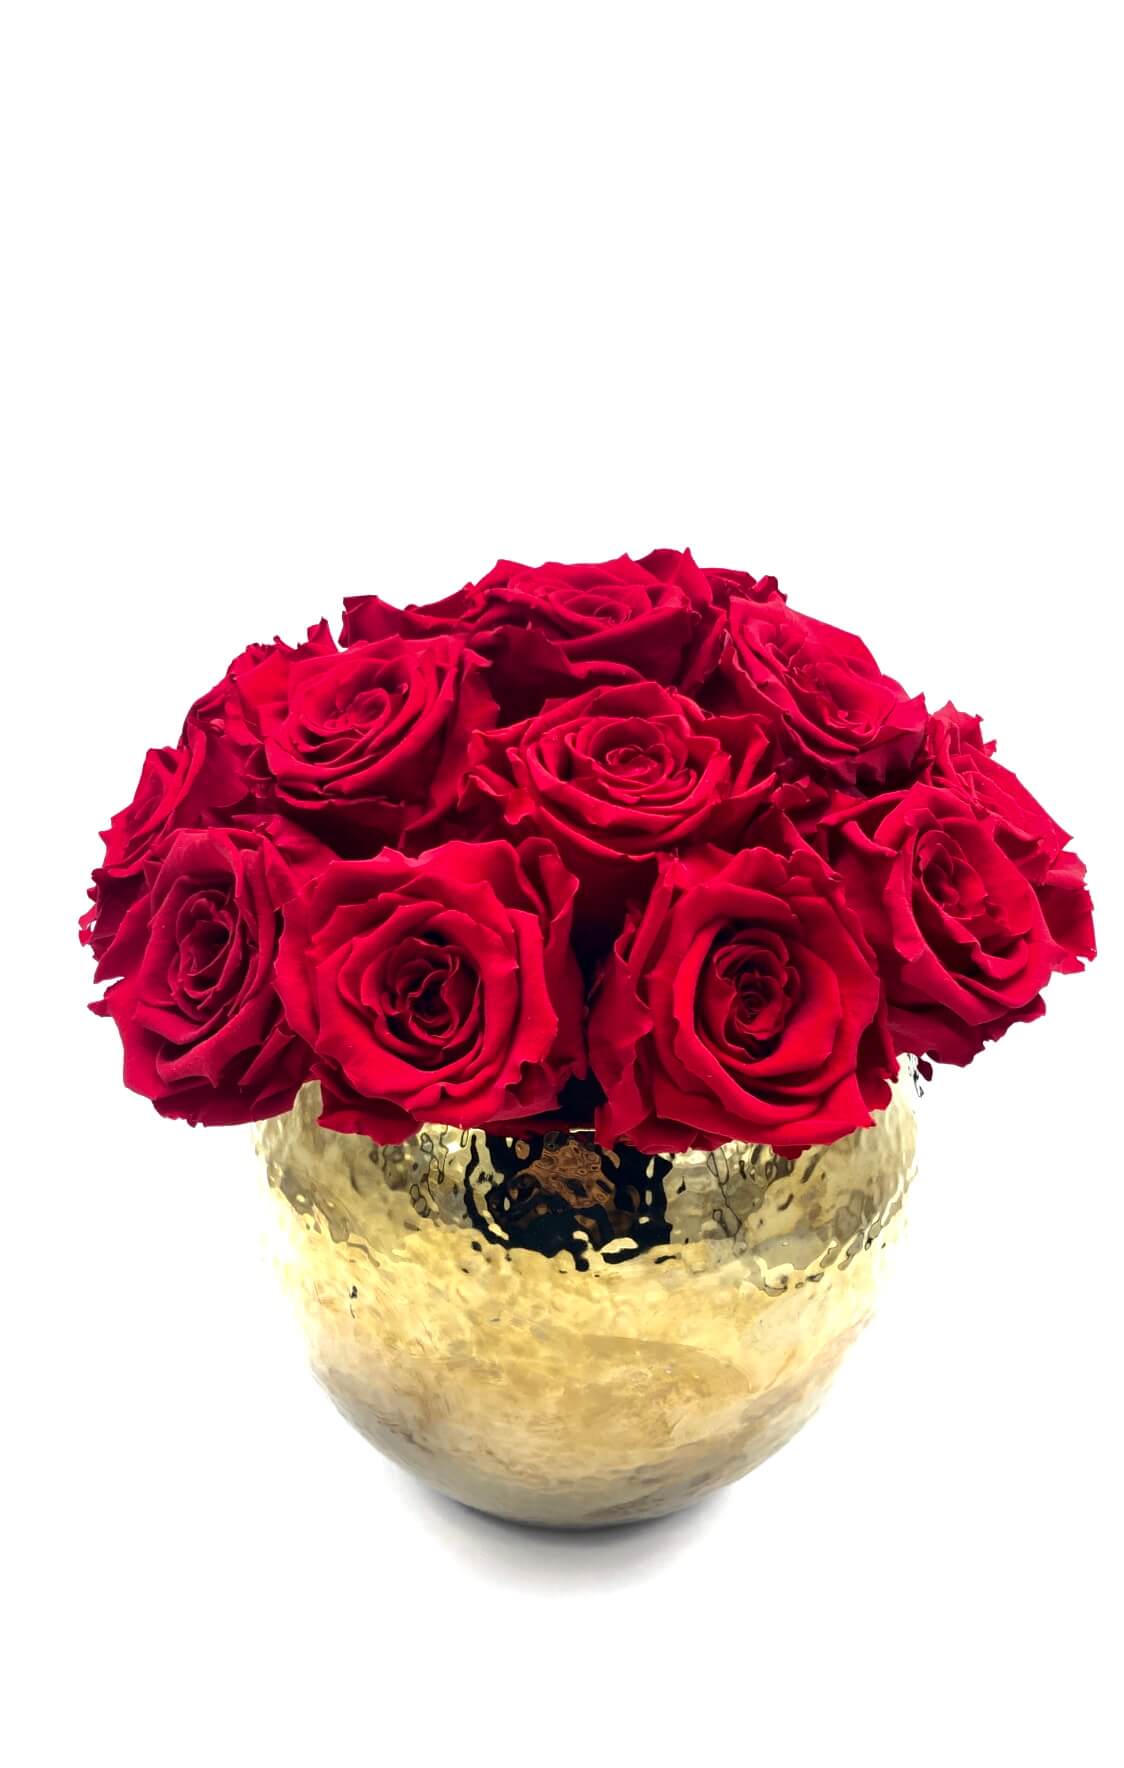 ETERNAL BLISS ANTIQUE TEXTURIZED GOLD VASE WITH PRESERVED RED ROSES - DOME SHAPE